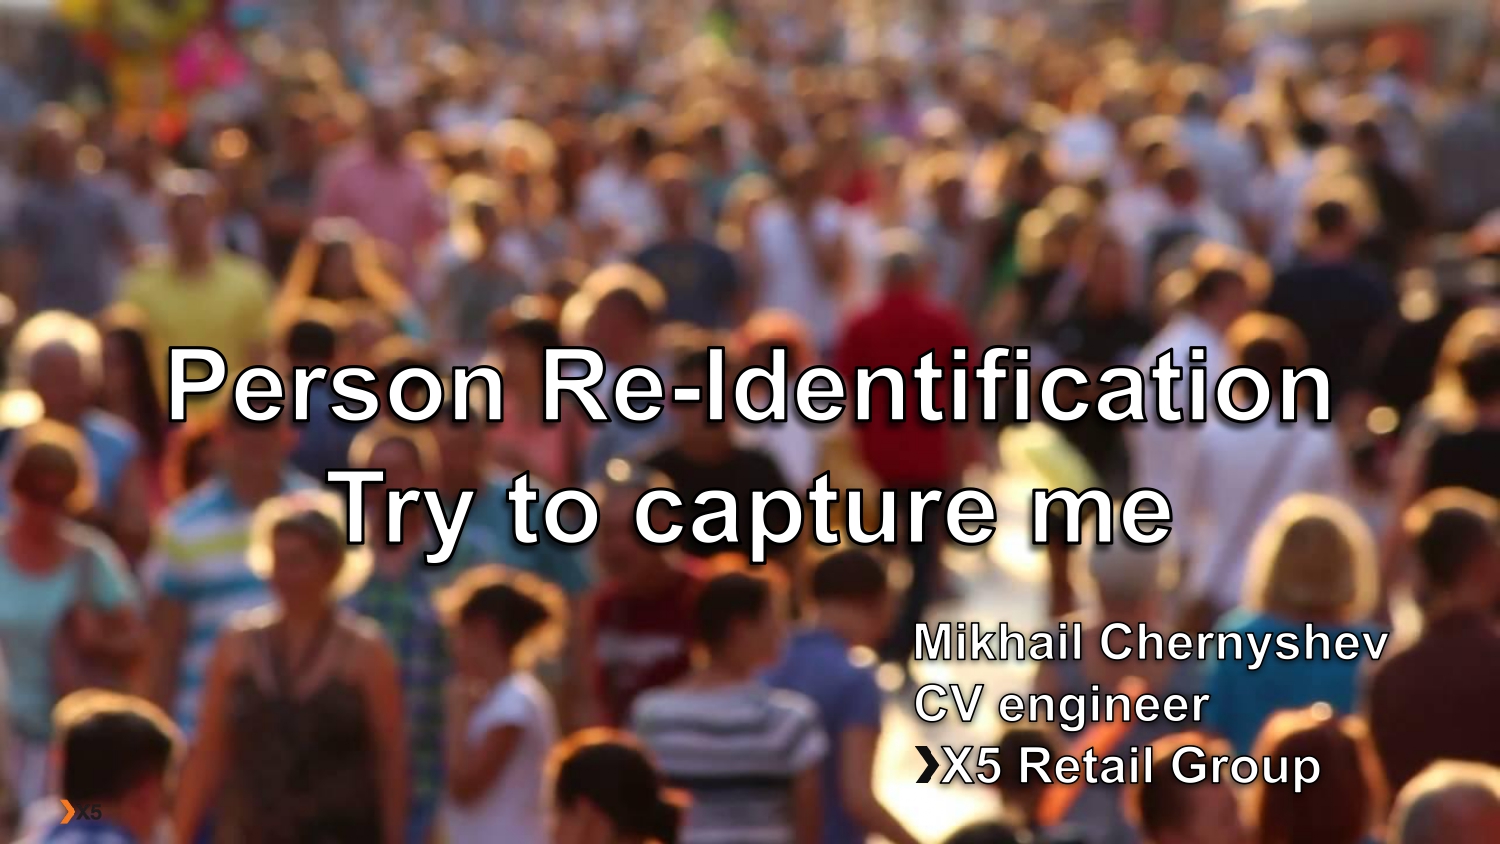 Face Re-Identification: Try to capture me